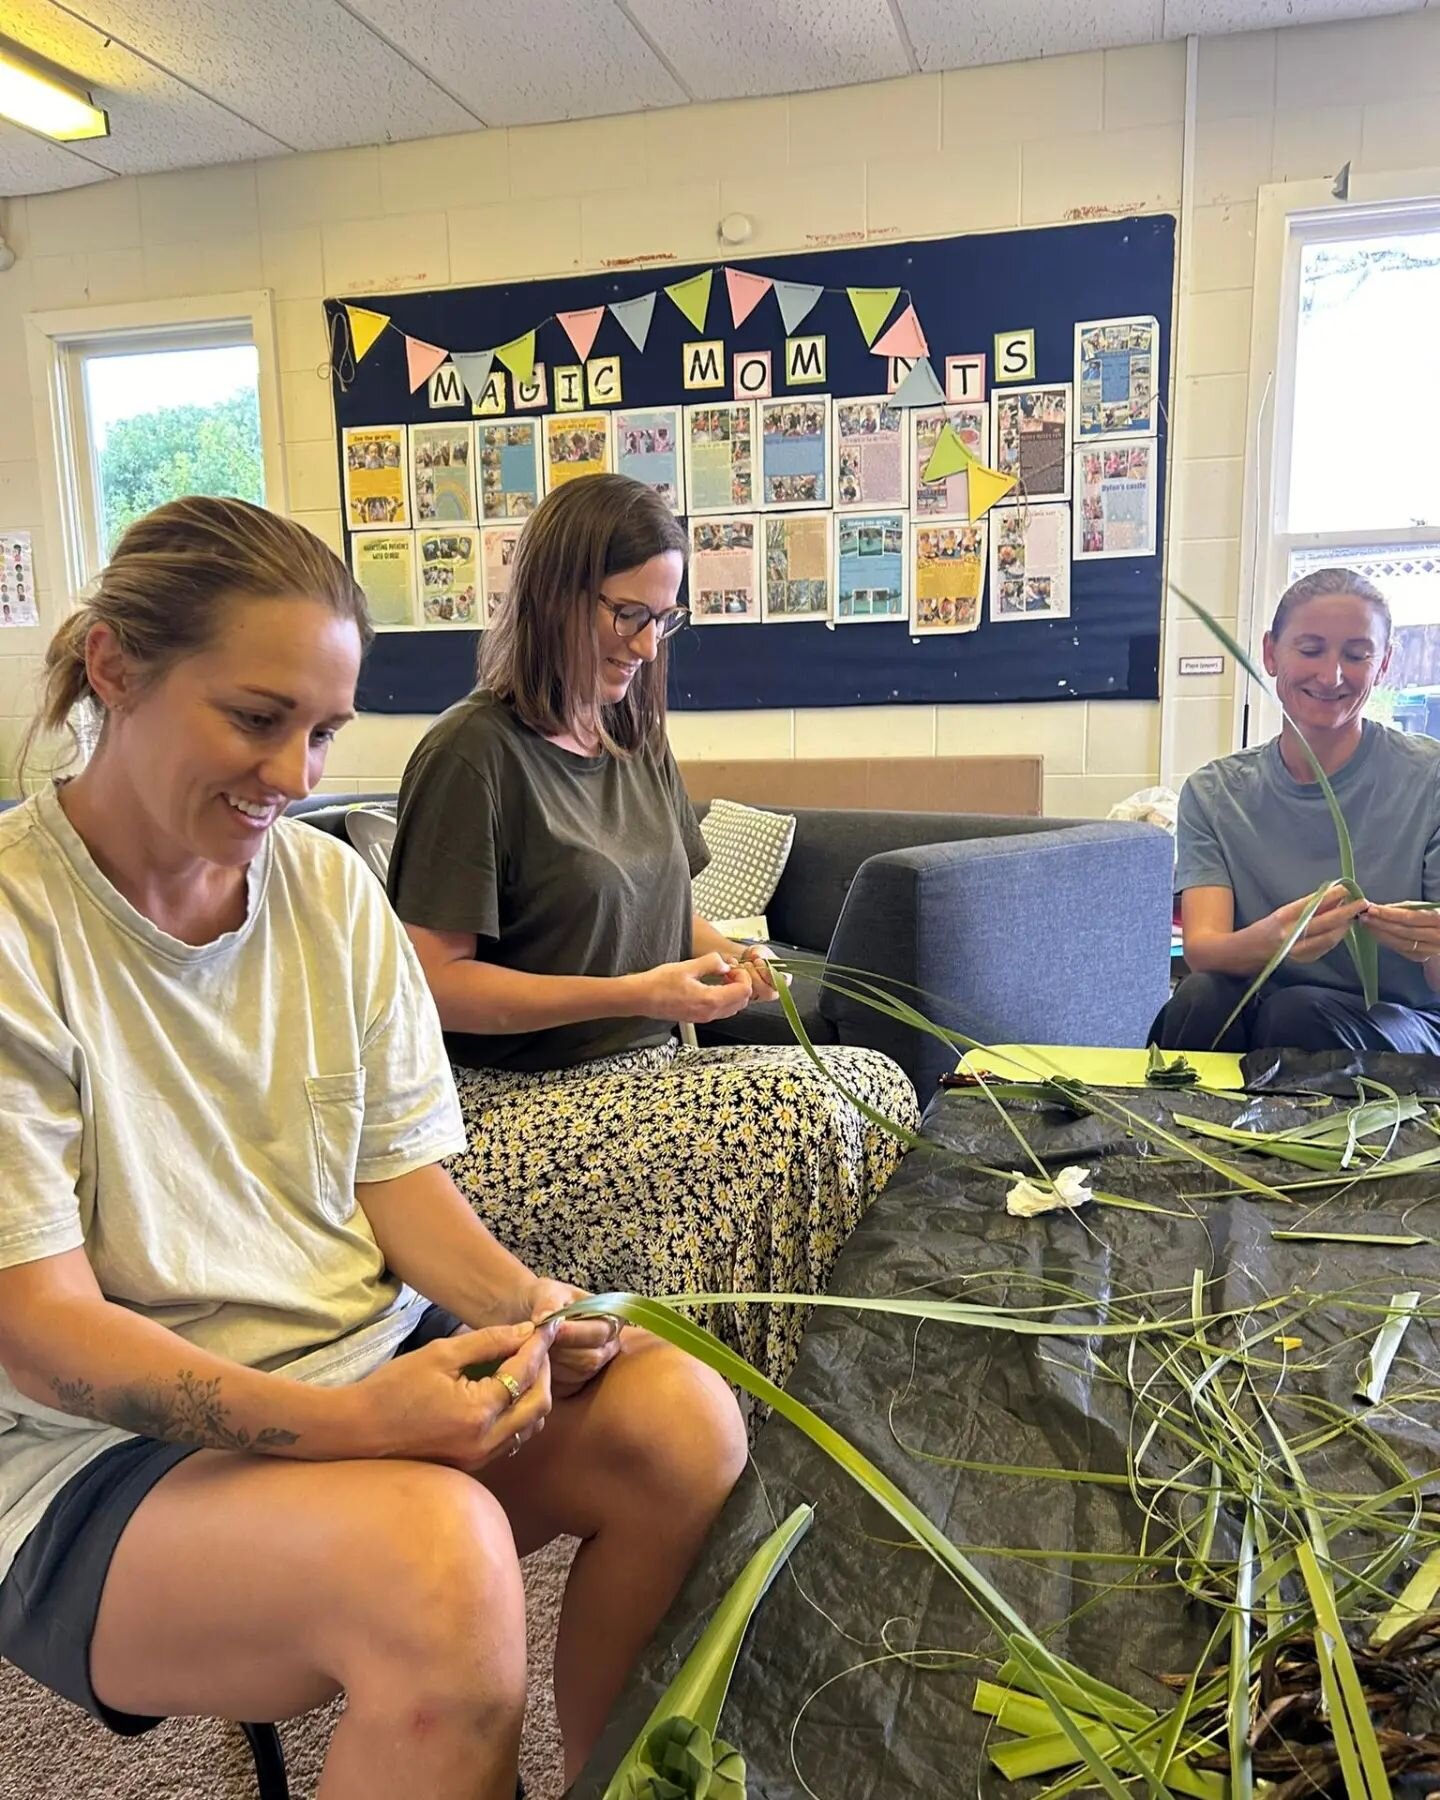 Some of our Mount Maunganui Playcentre members attended a PE4 &ldquo;Te Kākano - Te Reo me ona Tikanga&rdquo; workshop ran by Jean Yern at Pāpāmoa Playcentre earlier this month. 

Some wonderful examples of mātauranga (adult learning), coming togethe